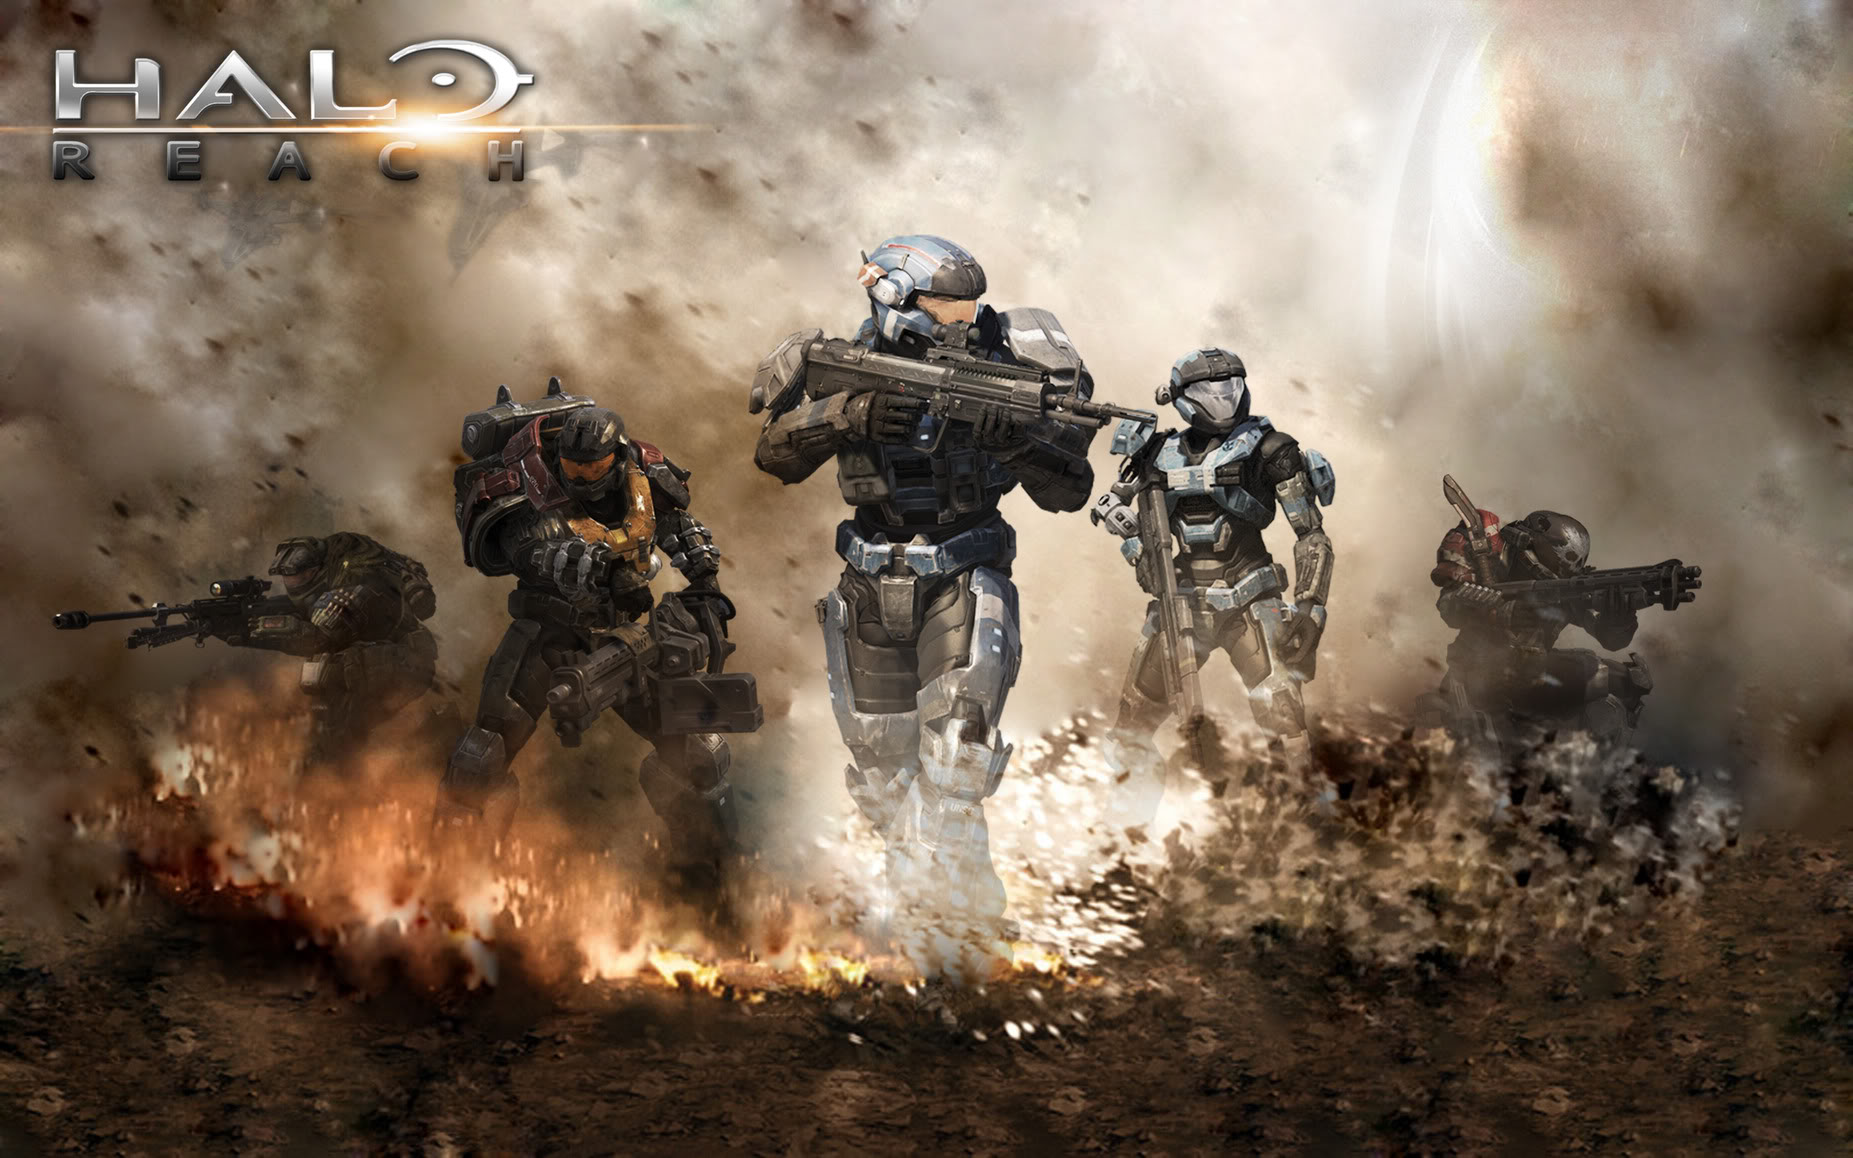 All About Halo images Halo Wallpapers HD wallpaper and